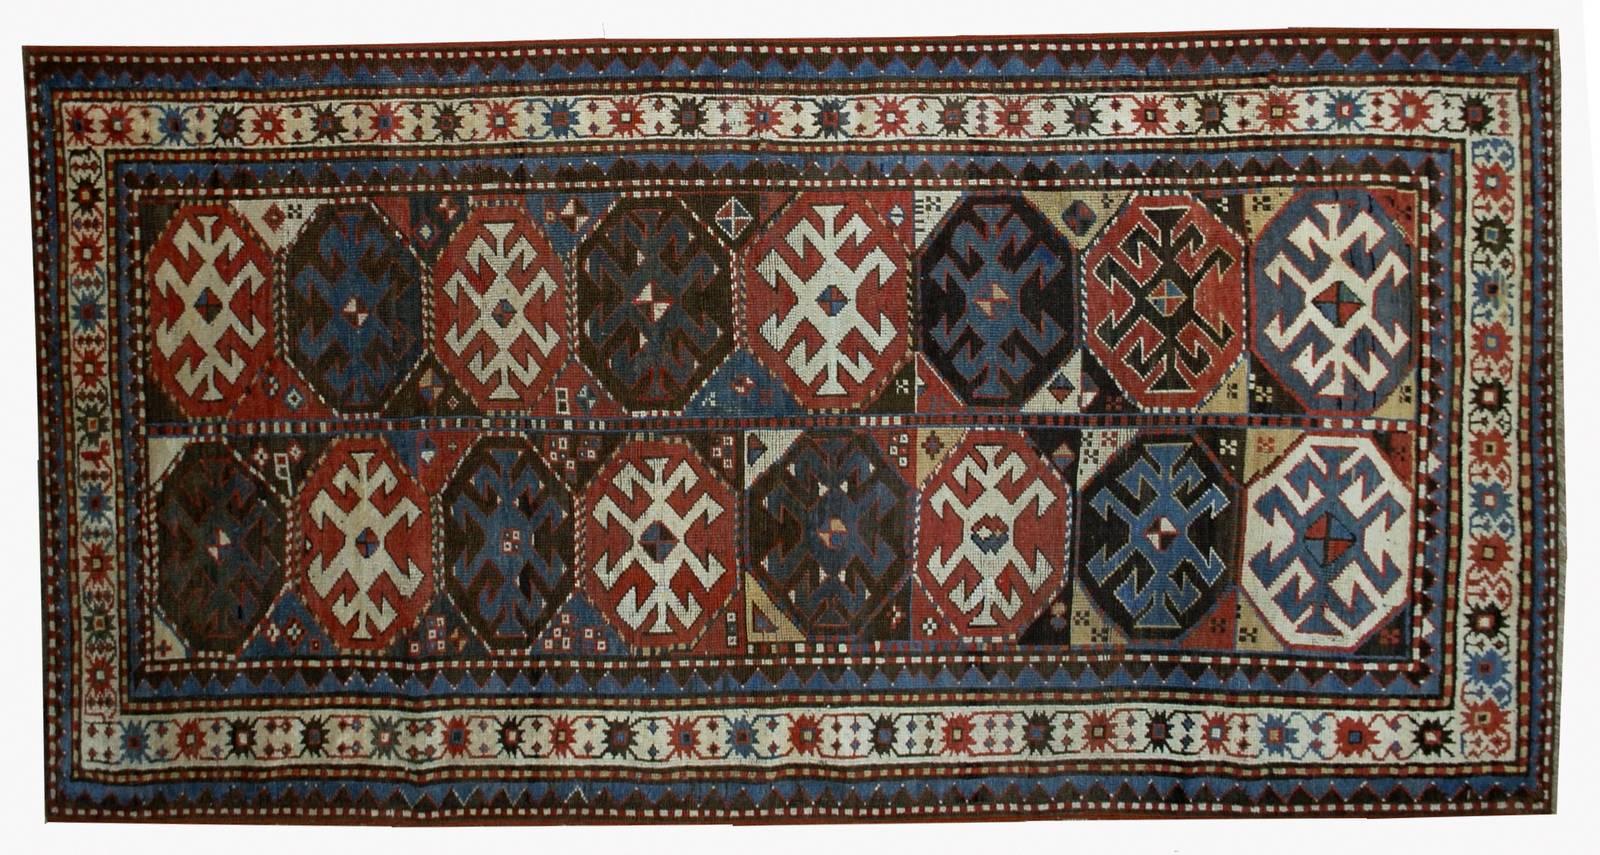 Antique handmade Caucasian Kazak Mohan rug in great condition. This rug has typical Mohan geometric design. Very nice bright shades of red, brown and blue and tribal design. The wool on this type of rugs is very soft which is saying about its